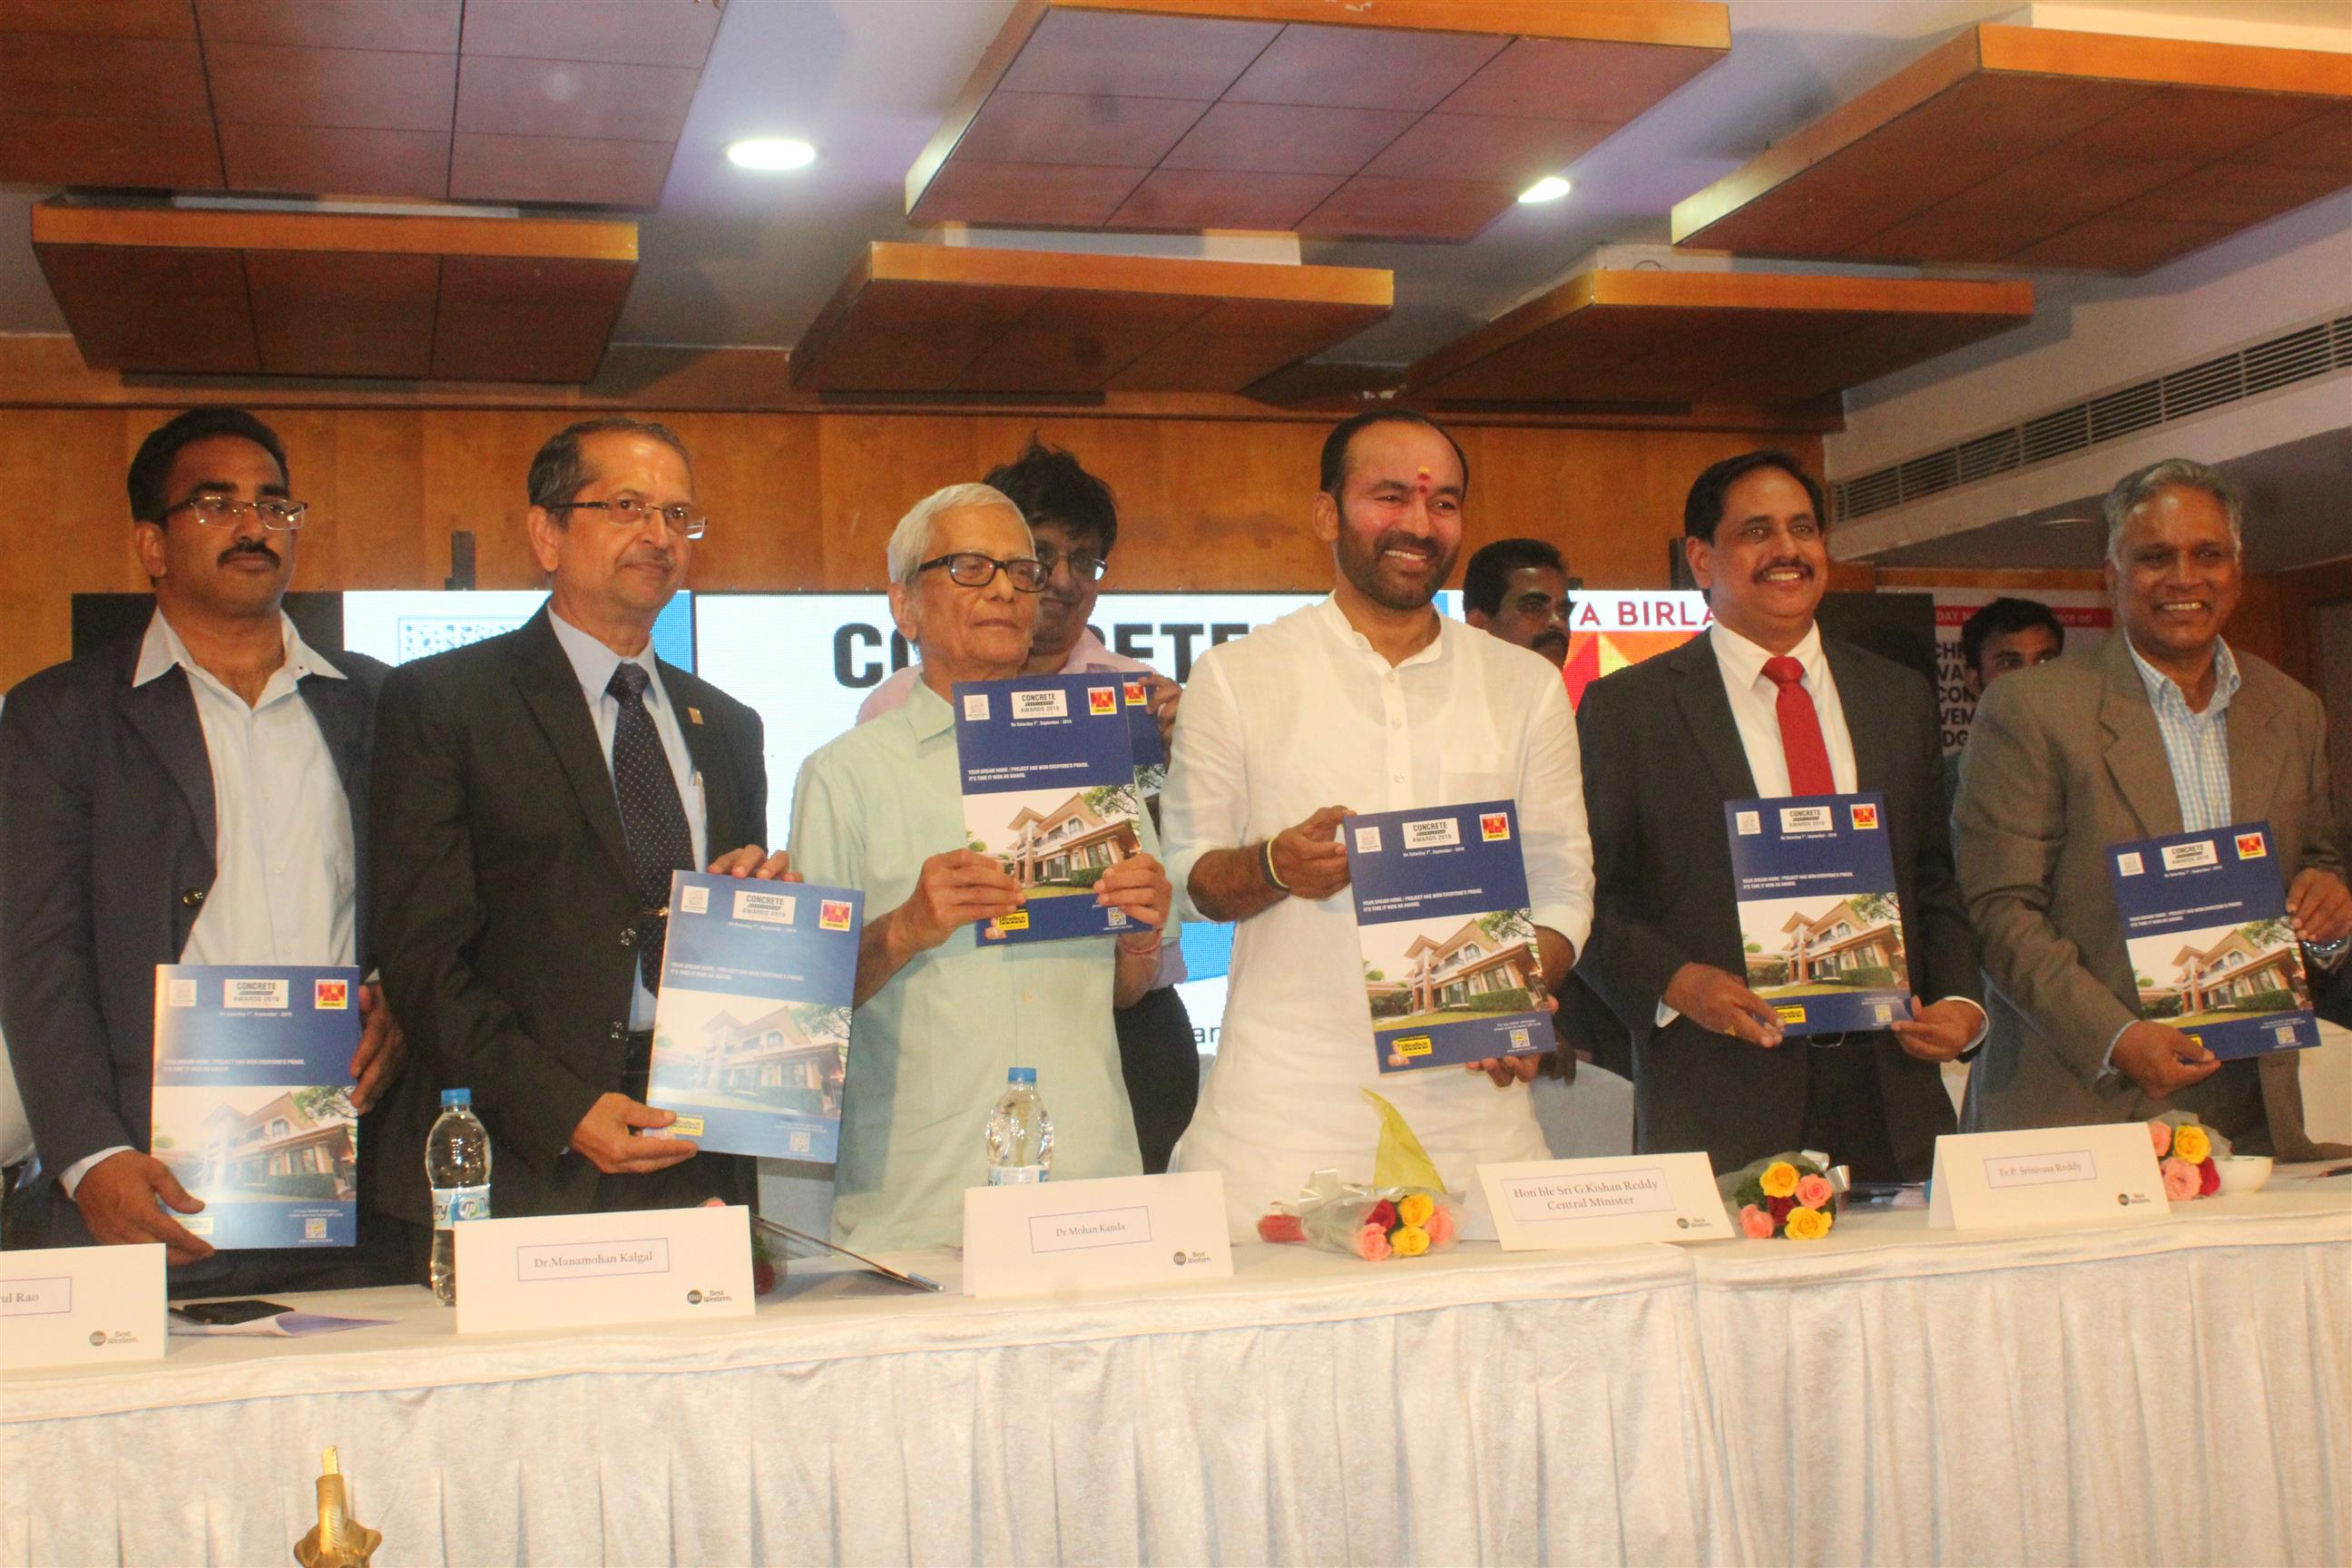 The Minister of State for Home Affairs, Shri G. Kishan Reddy releasing a booklet at the National conference on Concrete pavements and bridges, in Hyderabad on July 06, 2019.  